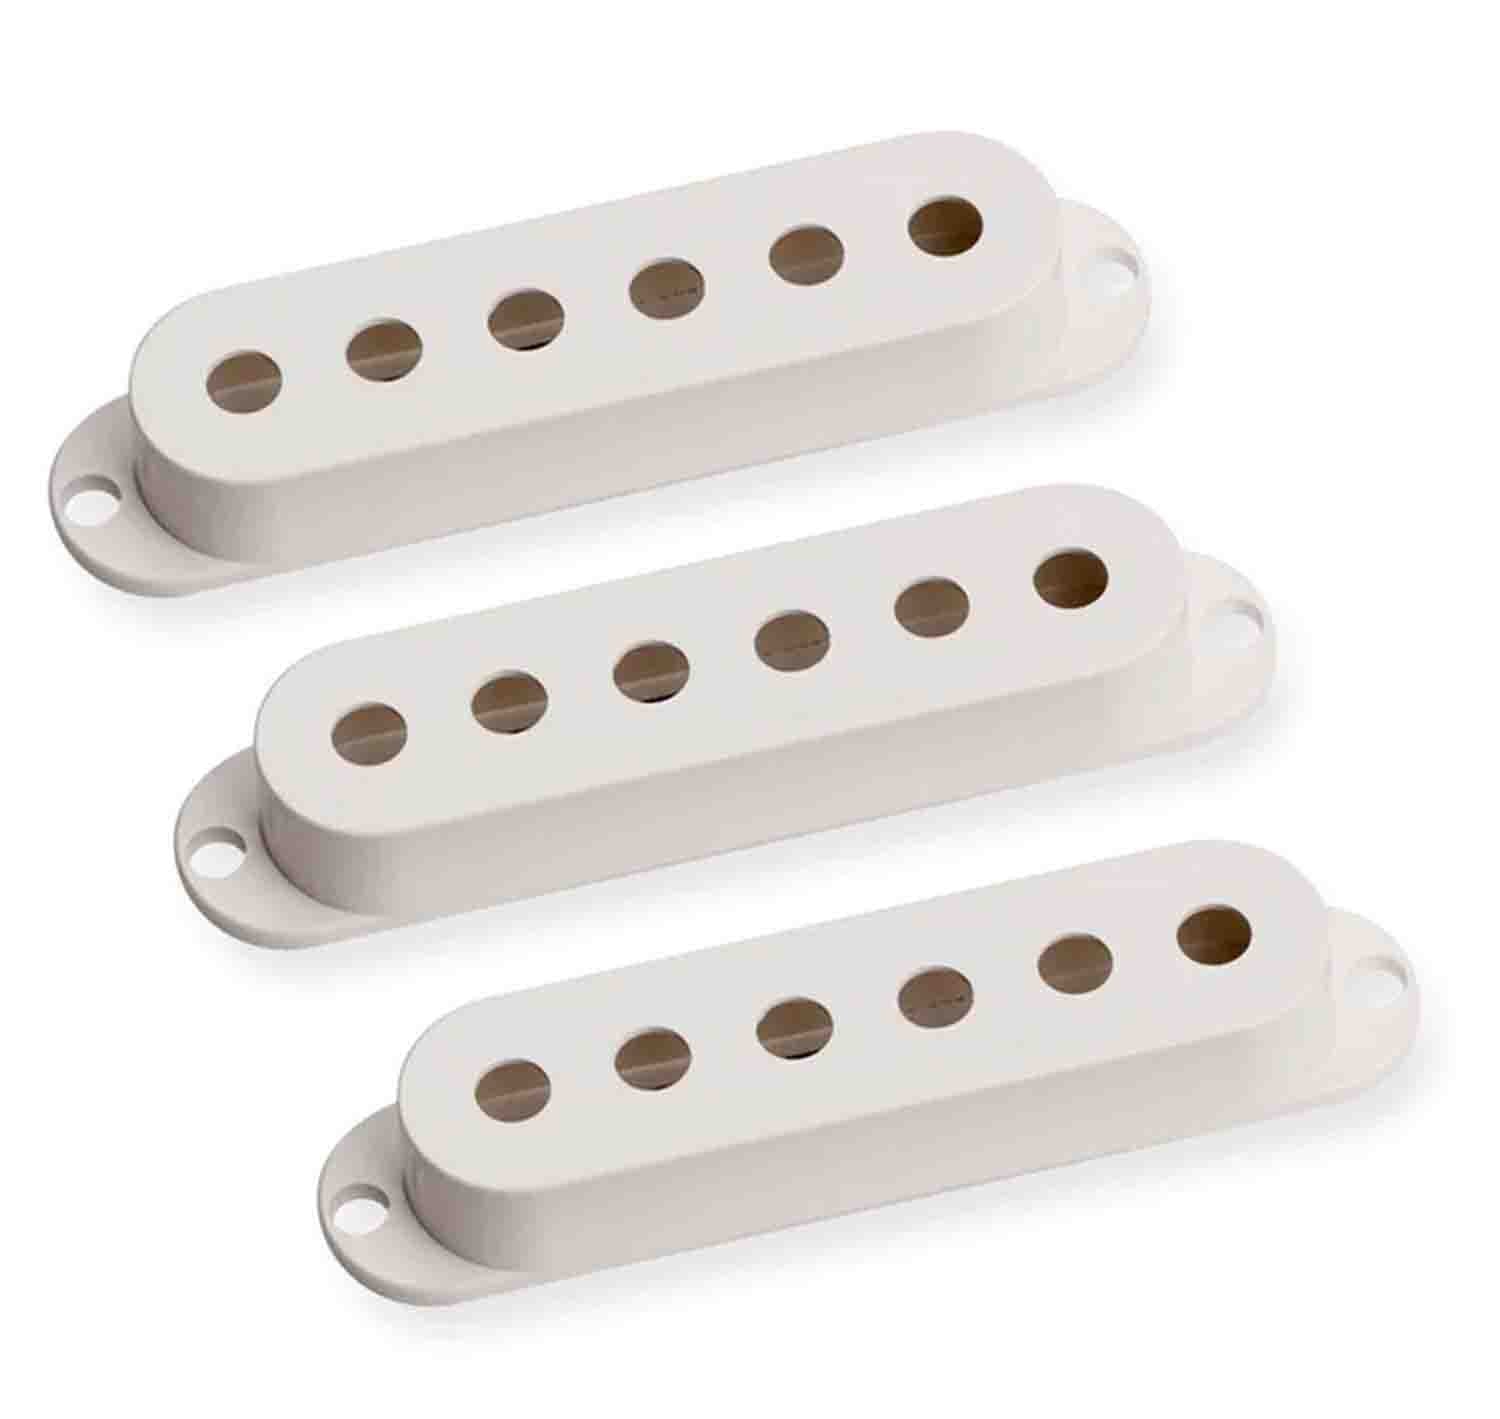 Seymour Duncan Strat Pickup Cover Set Of 3 No Logo Parchment 11800-01-P-NL - Hollywood DJ